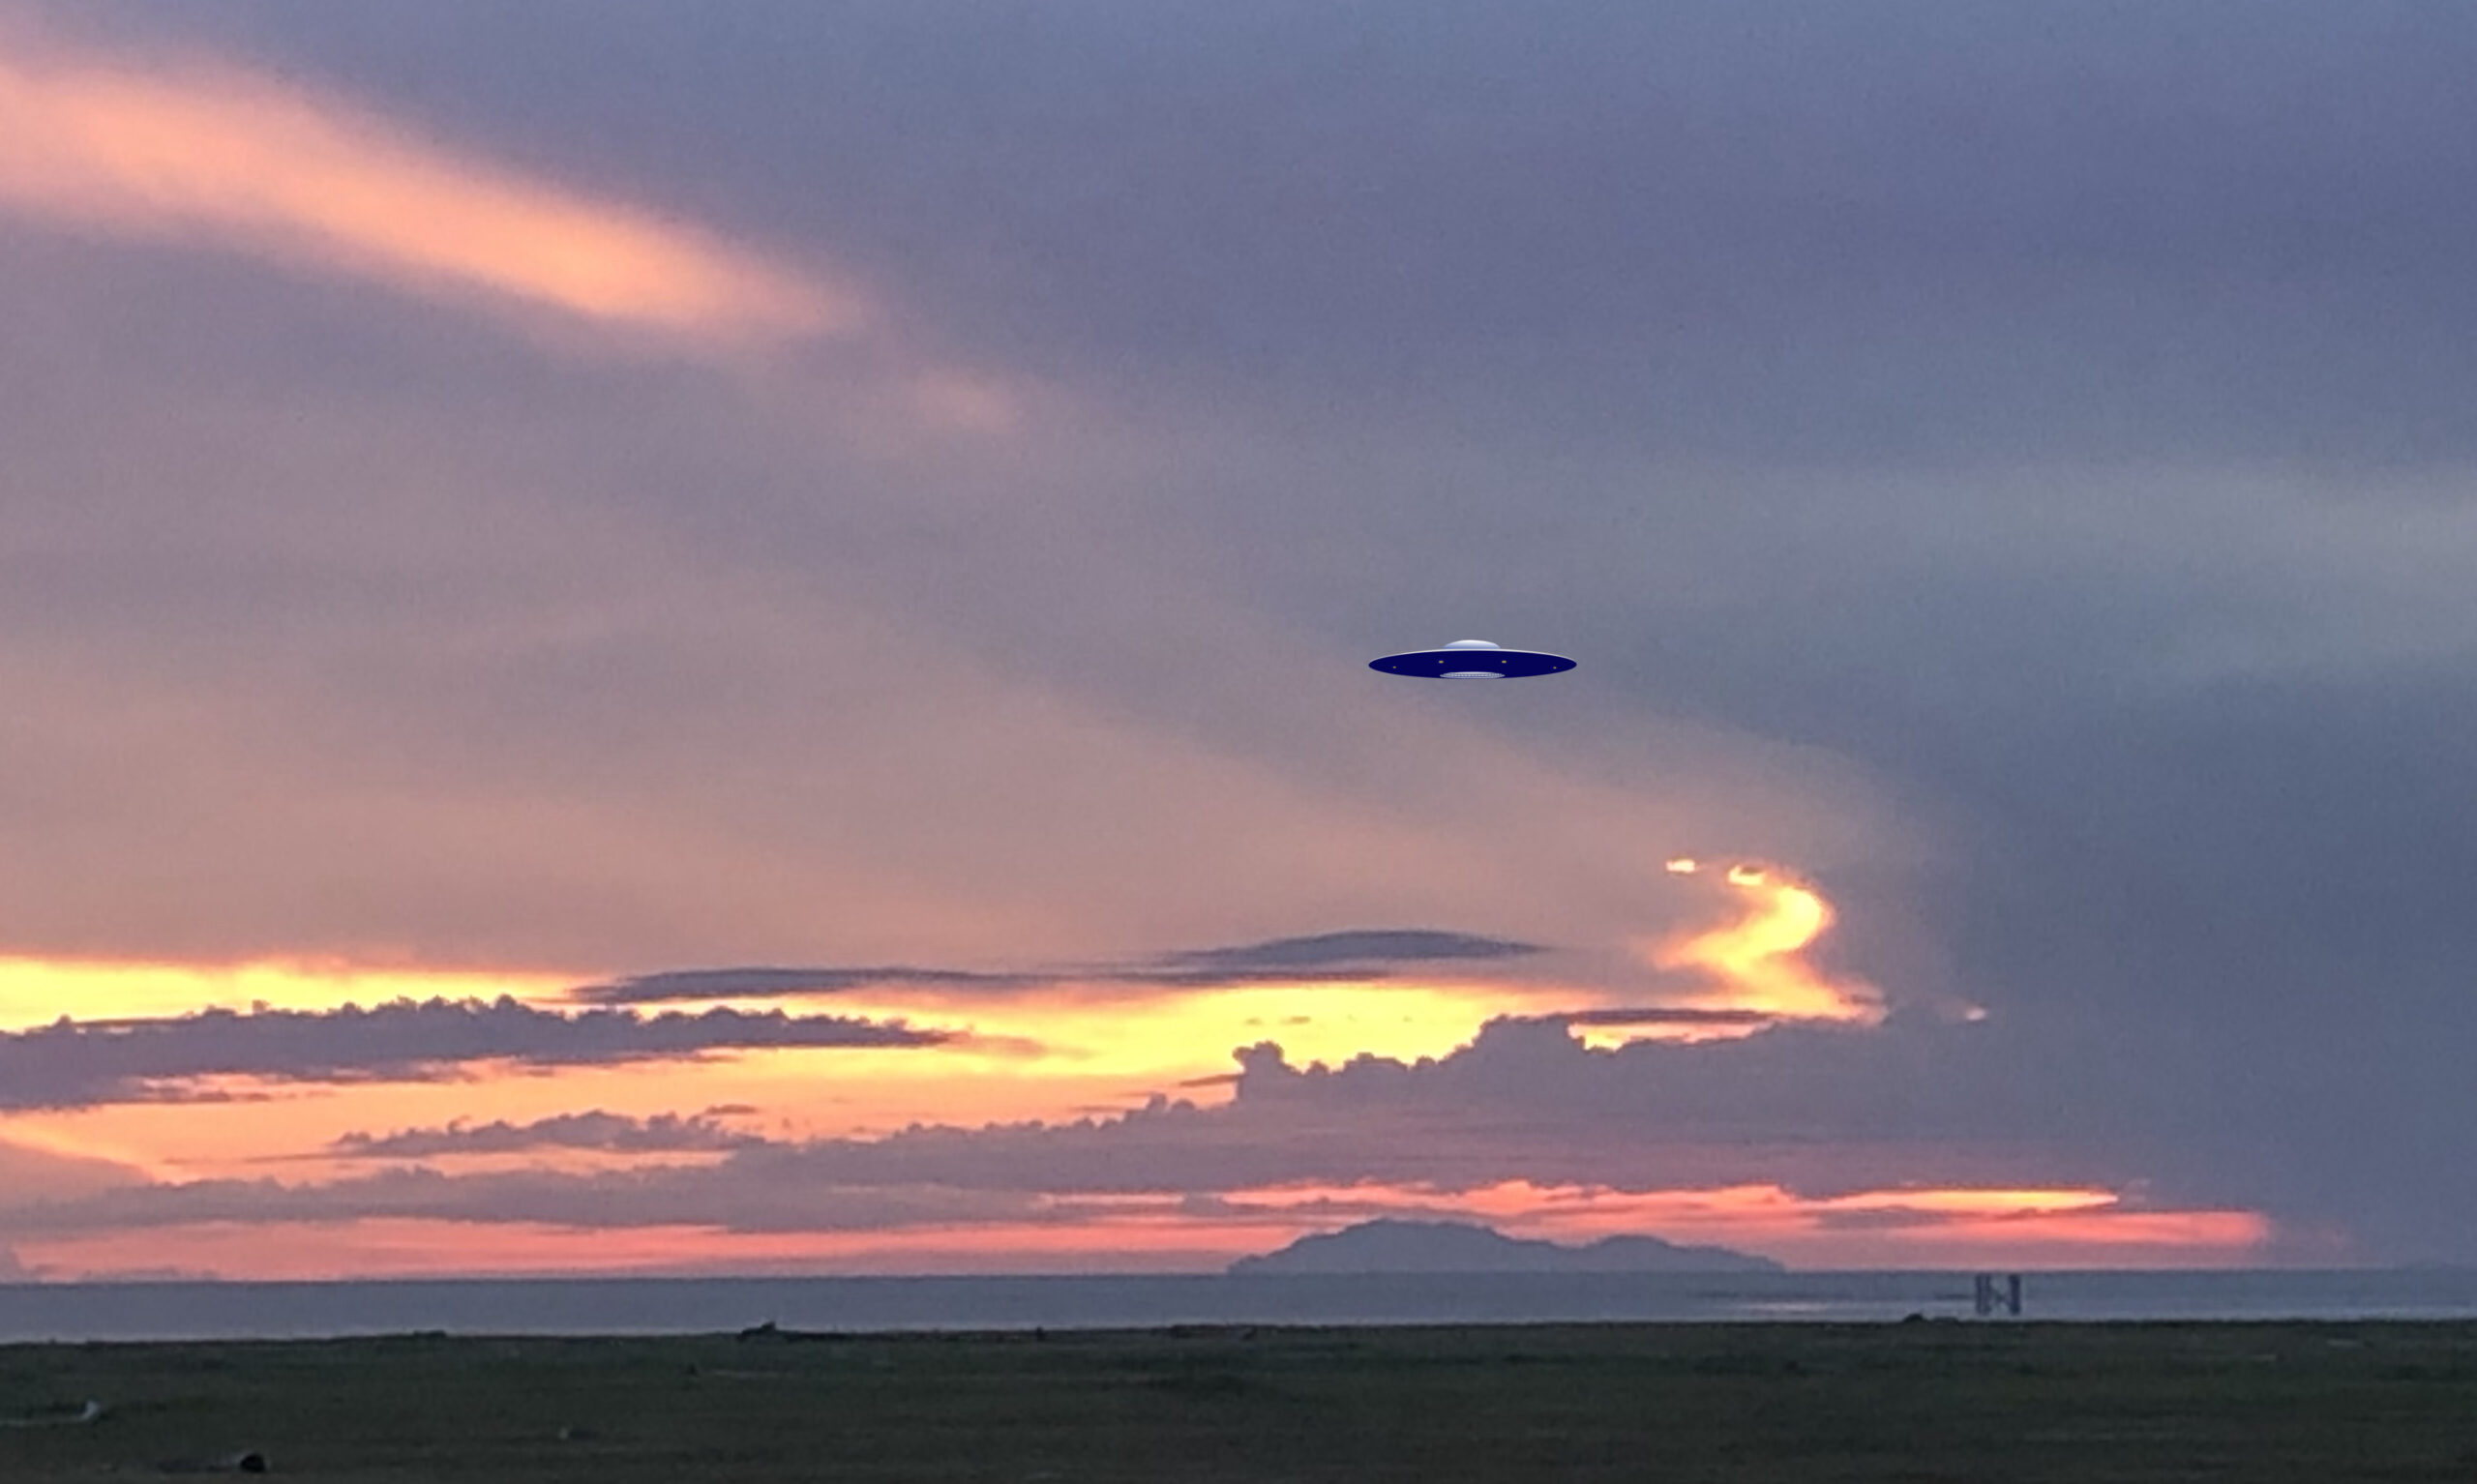 US lawmaker claims to have witnessed UFO craft.